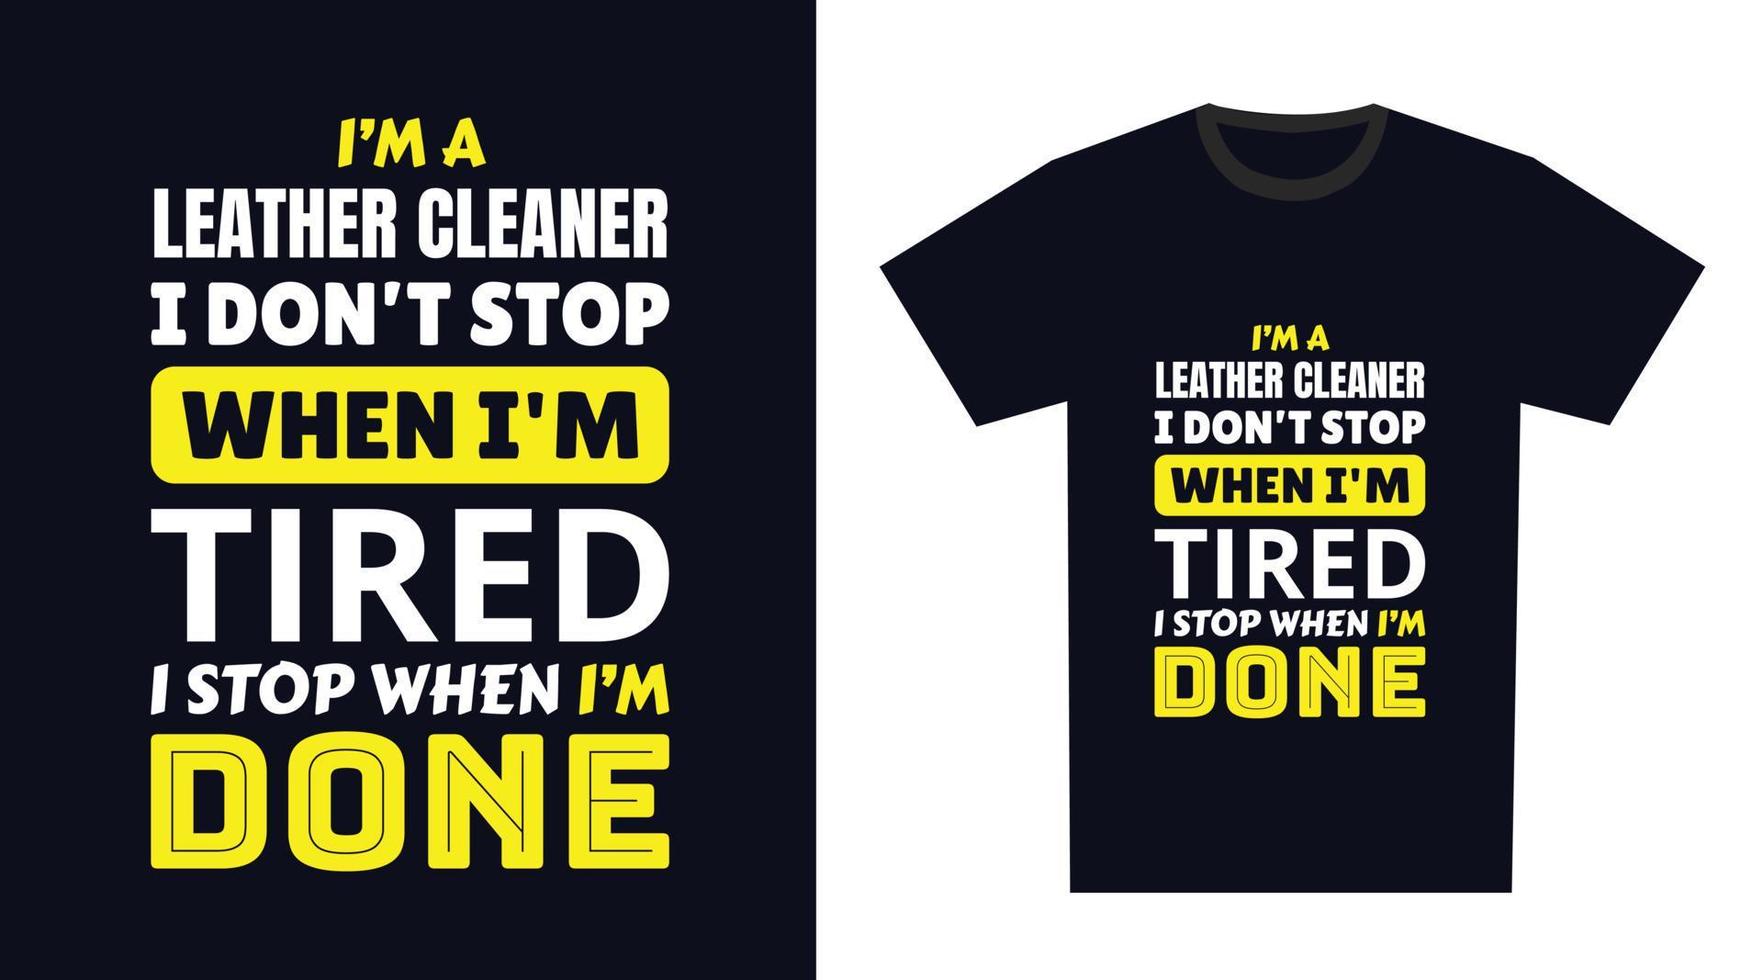 leather cleaner T Shirt Design. I 'm a leather cleaner I Don't Stop When I'm Tired, I Stop When I'm Done vector